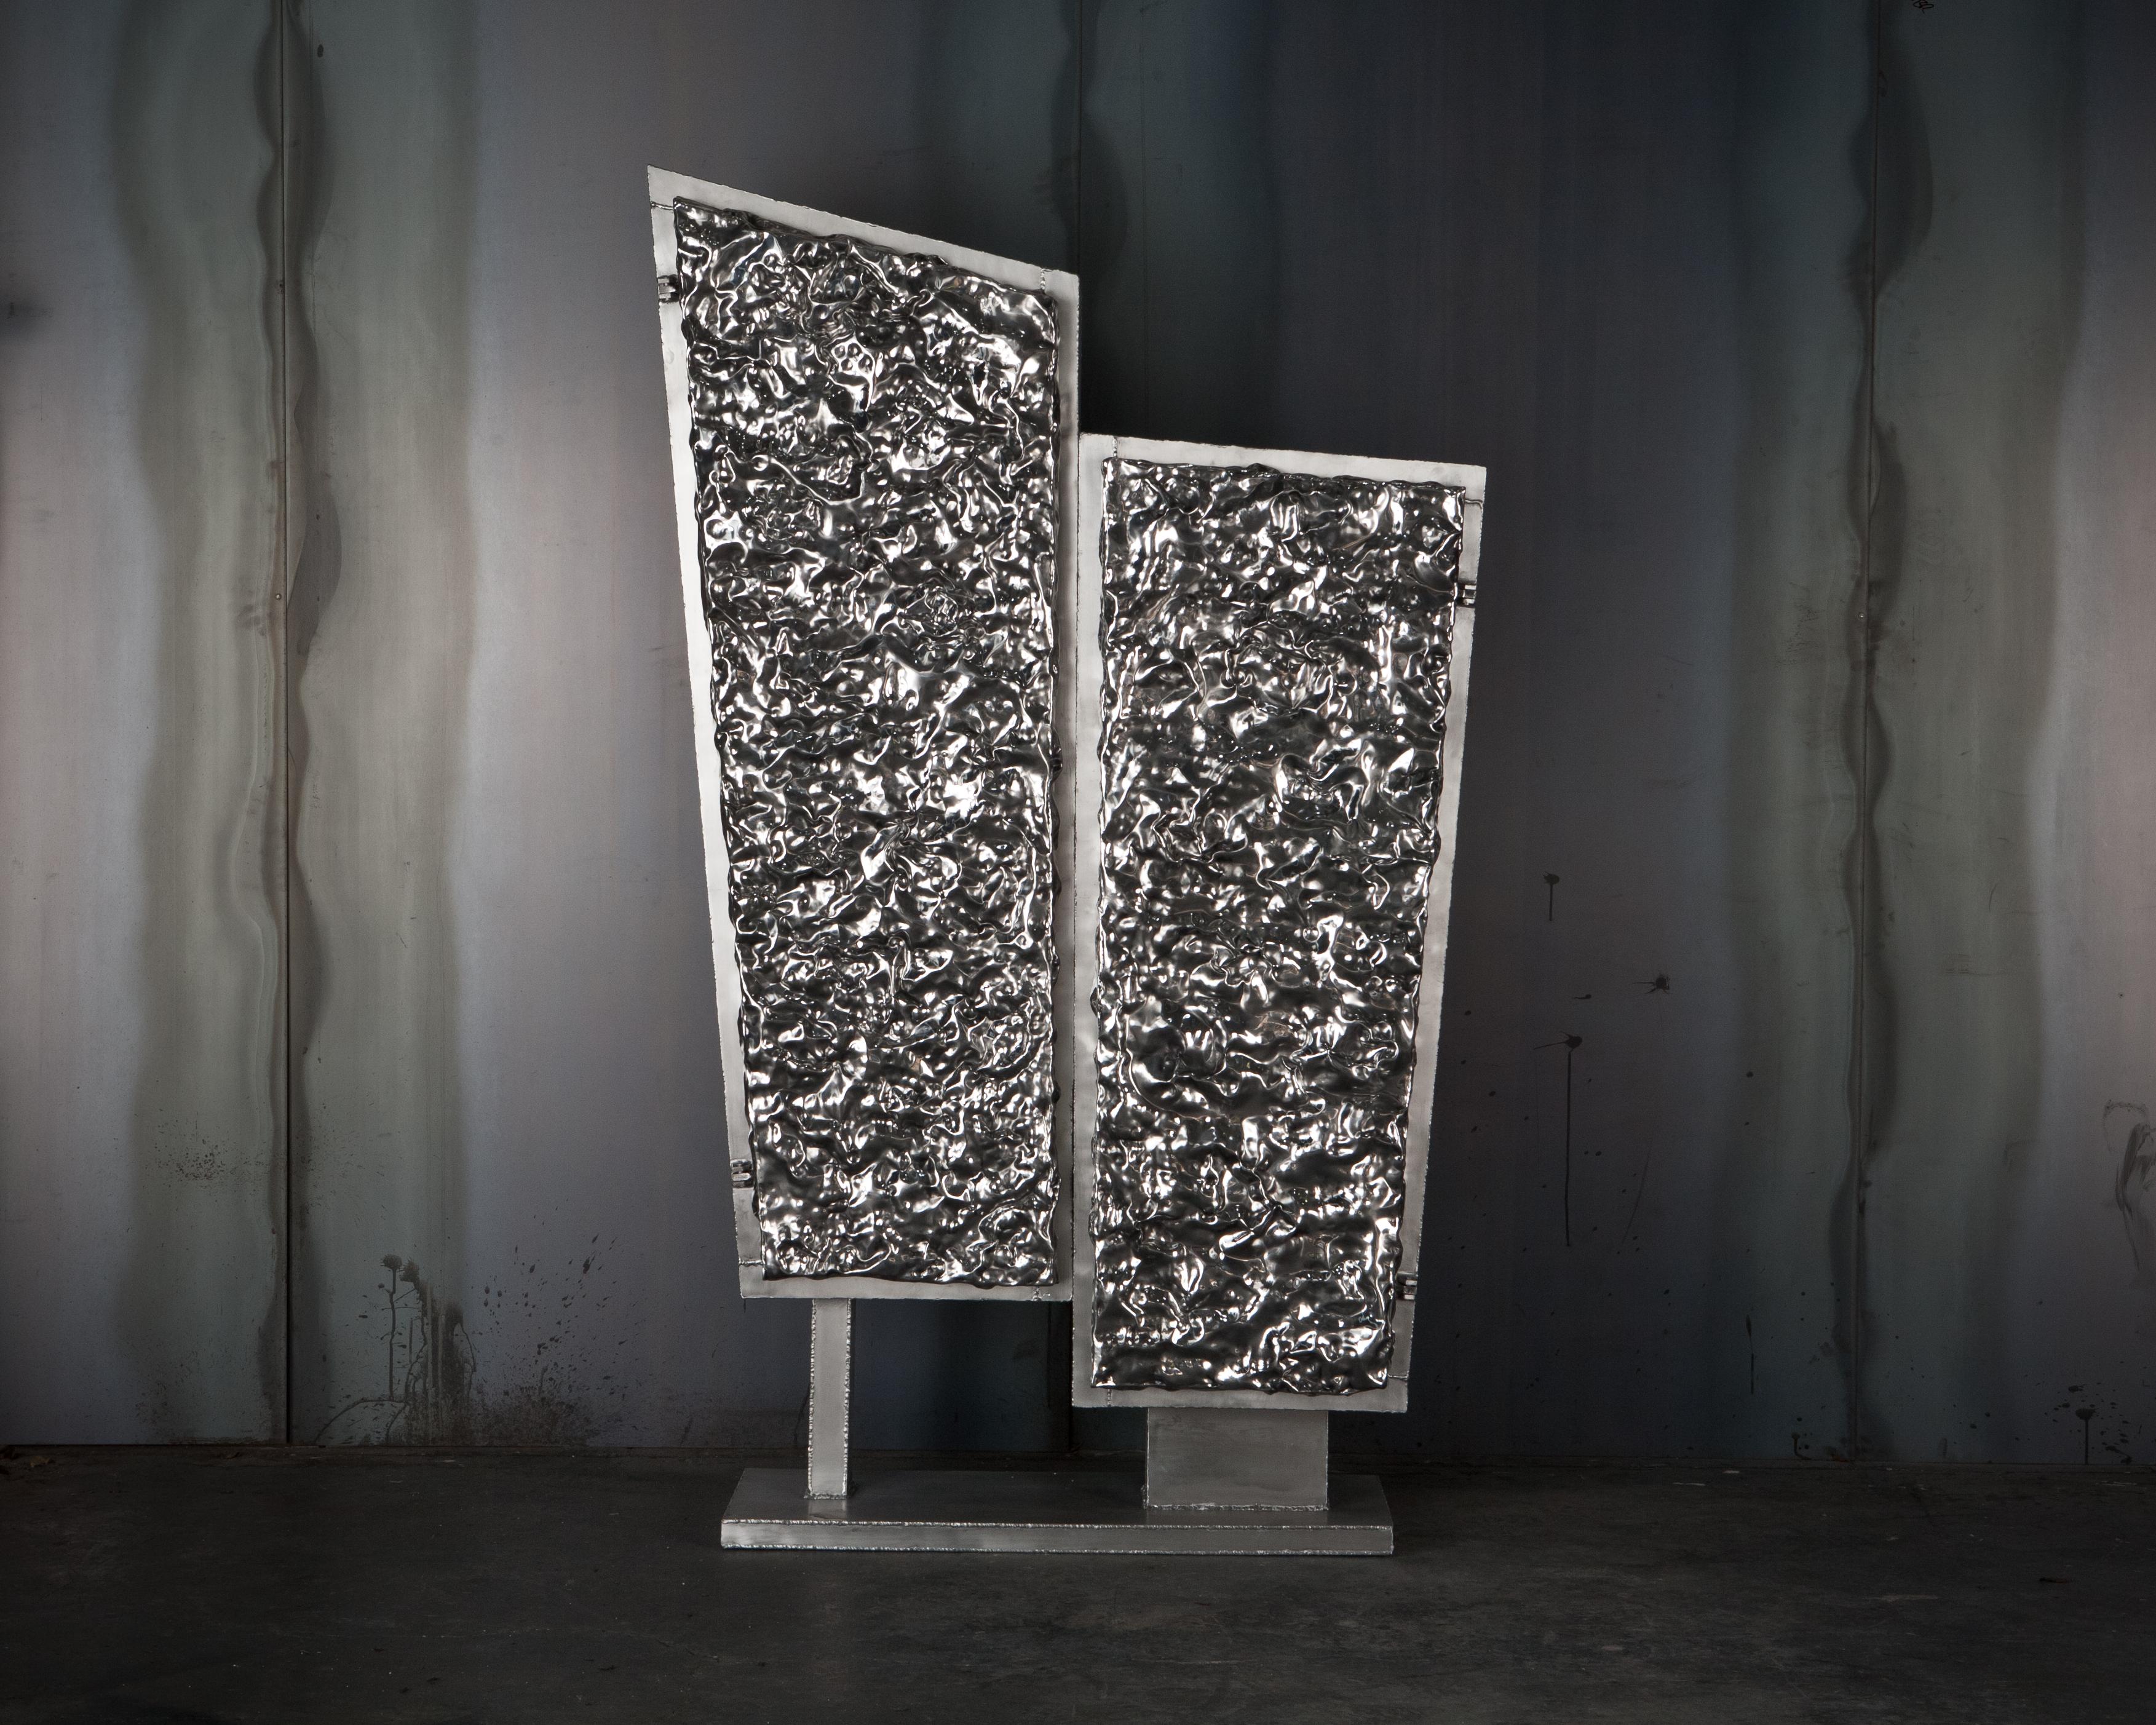 Michael Gittings Studio.
Unique crinkle cabinet
Hand beaten, polished aluminium and brushed aluminium.
Measures: 197 cm 110 cm 42 cm.

Michael Gittings
Melbourne based designer Michael Gittings aims to
challenge pre-conceptions around